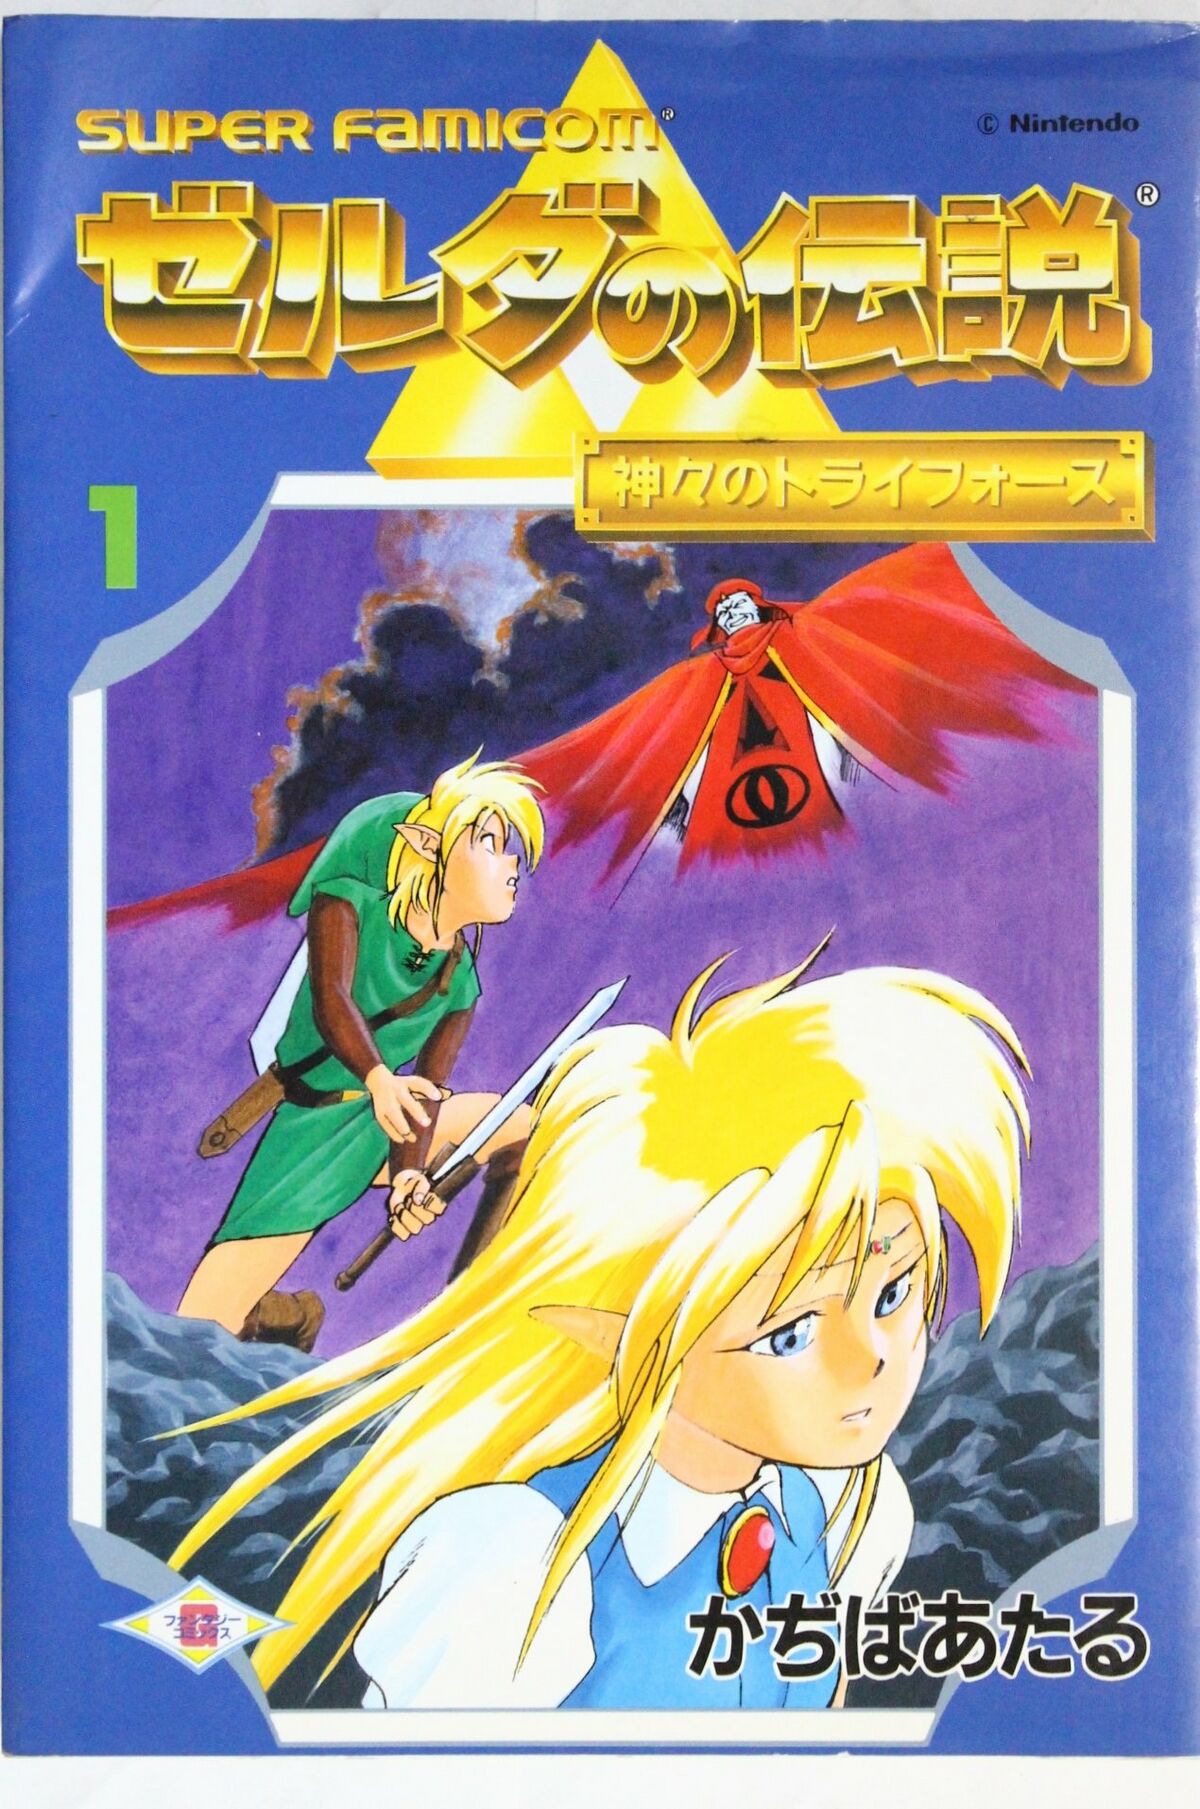 A Link To The Past Manga The Legend of Zelda: A Link to the Past (Cagiva) - Zelda Wiki